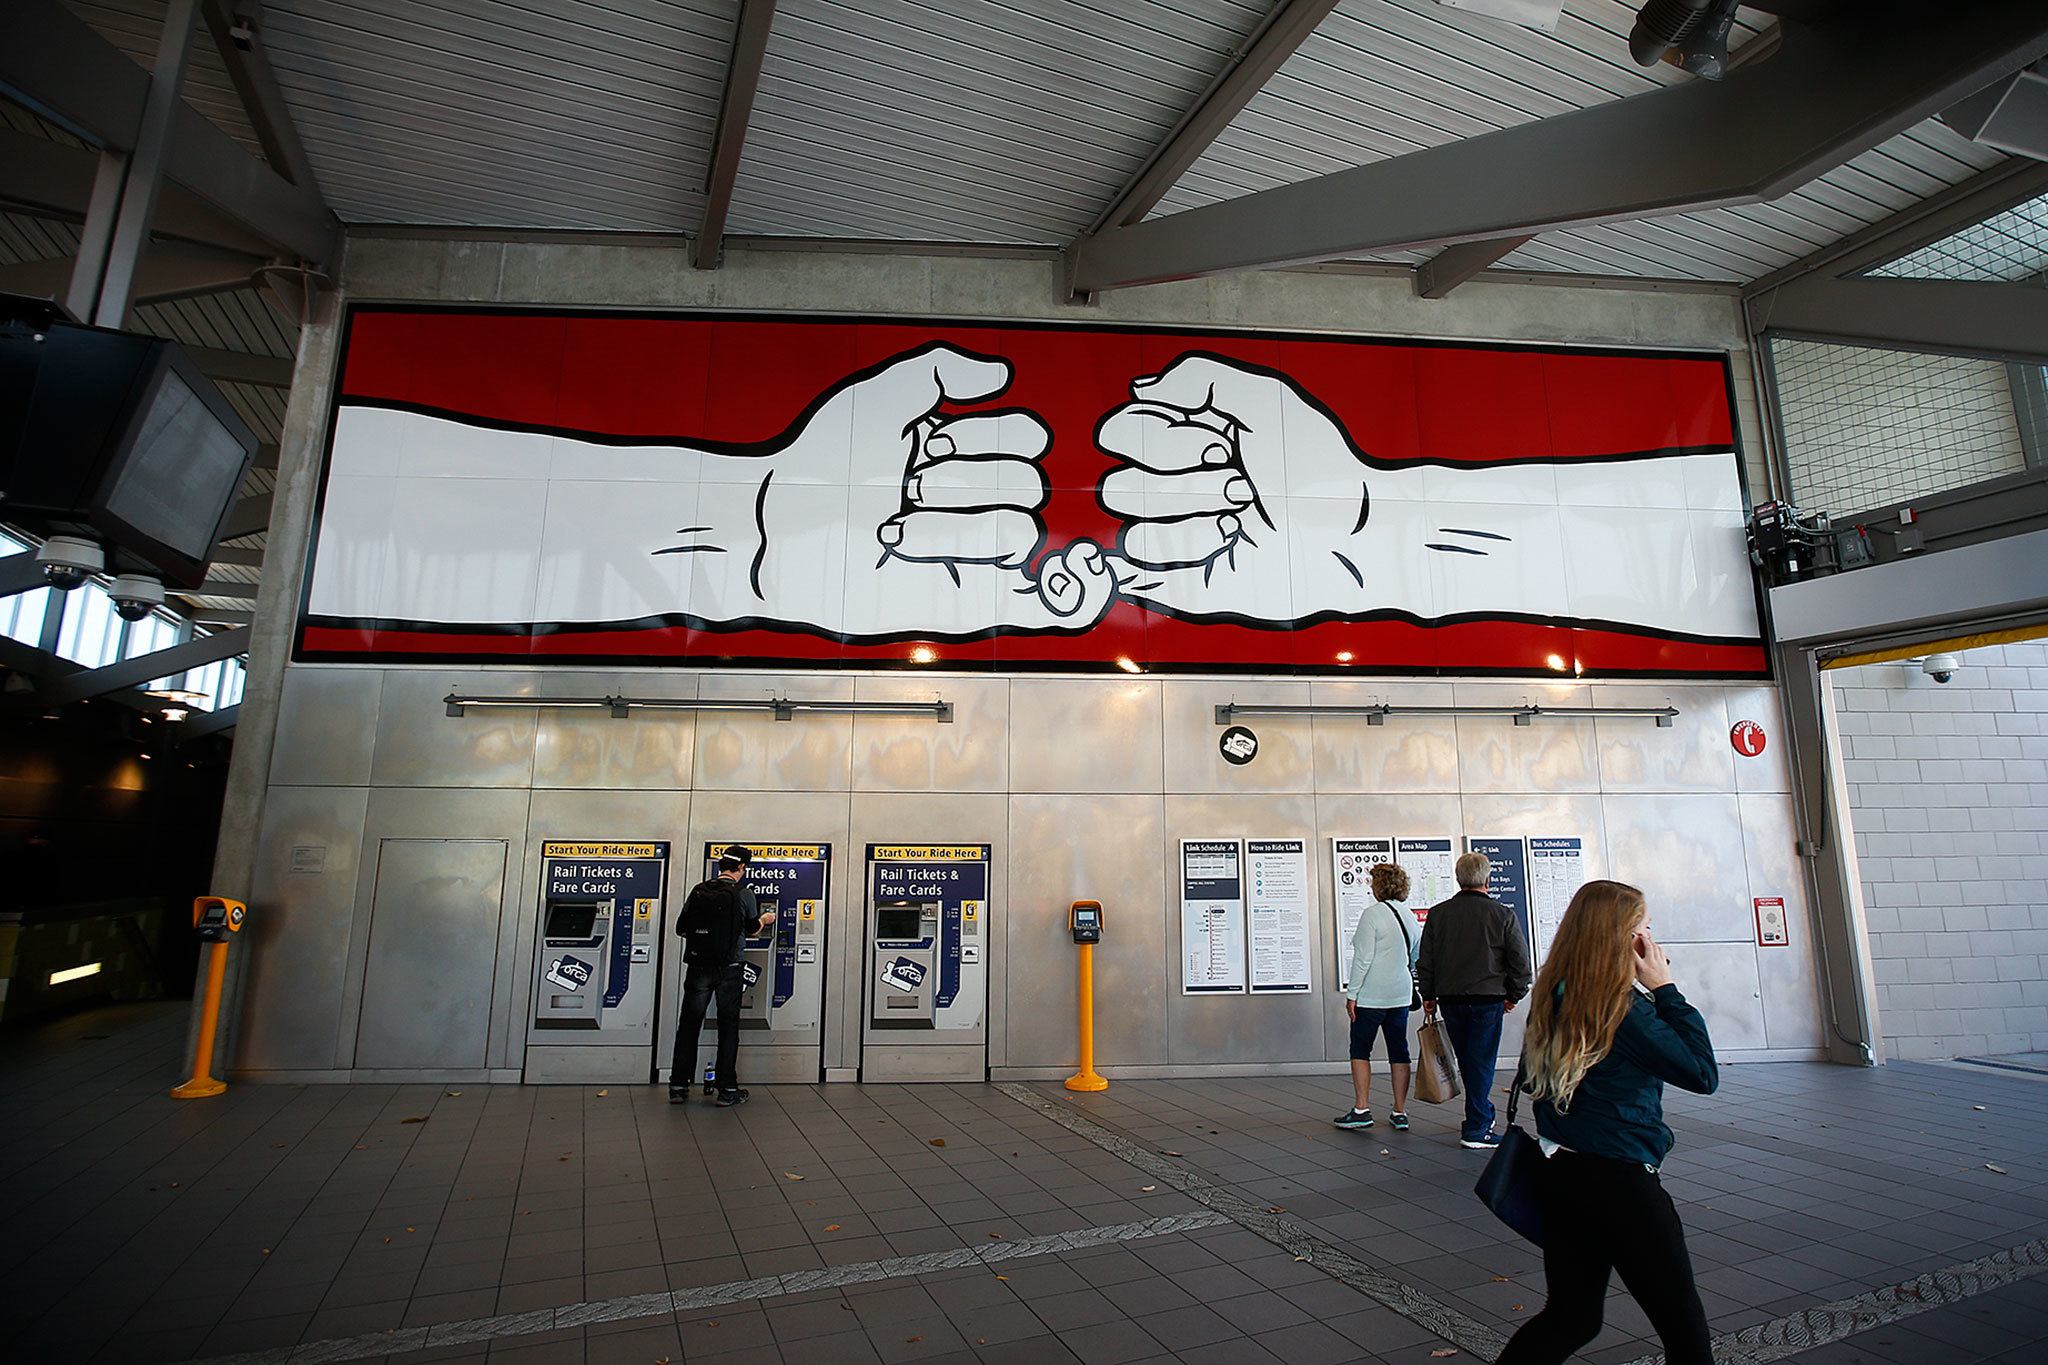 “Crossed Pinkies” by Seattle artist Ellen Forney, at the Capitol Hill Link light rail station in Seattle. (Ian Terry / The Herald)